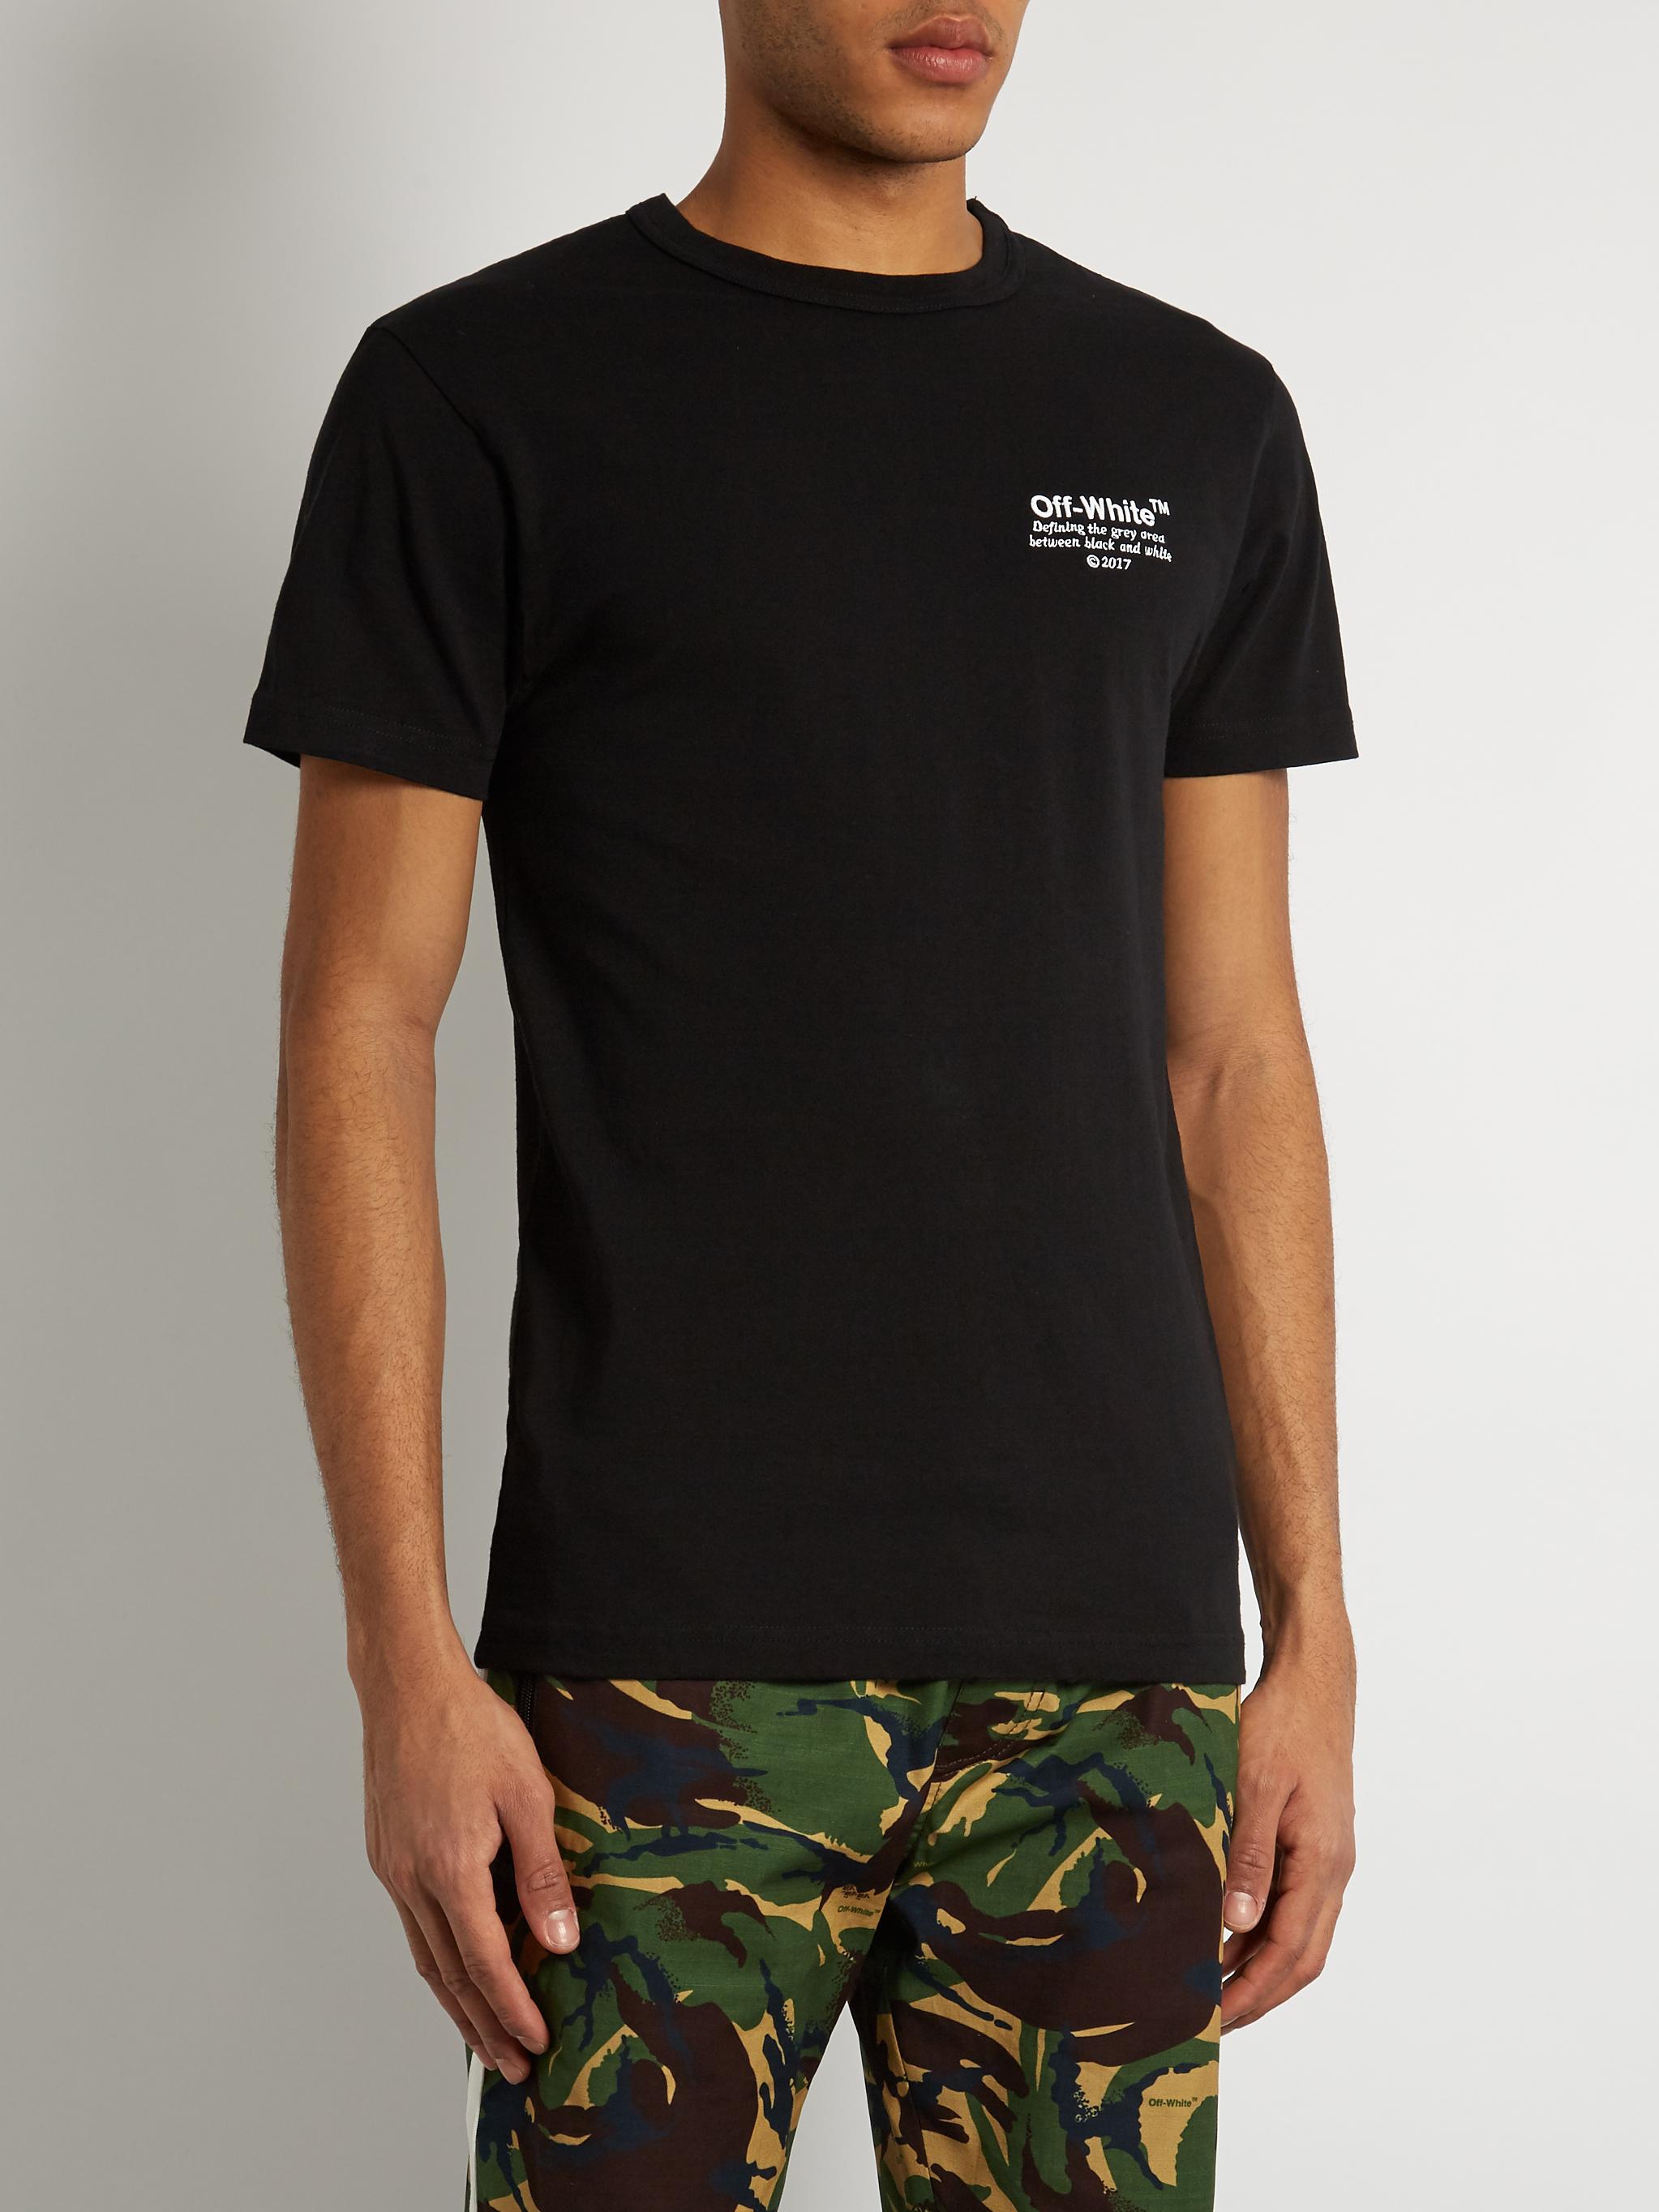 Off-White c/o Virgil Abloh Embroidered Cotton-jersey T-shirt in Black ...